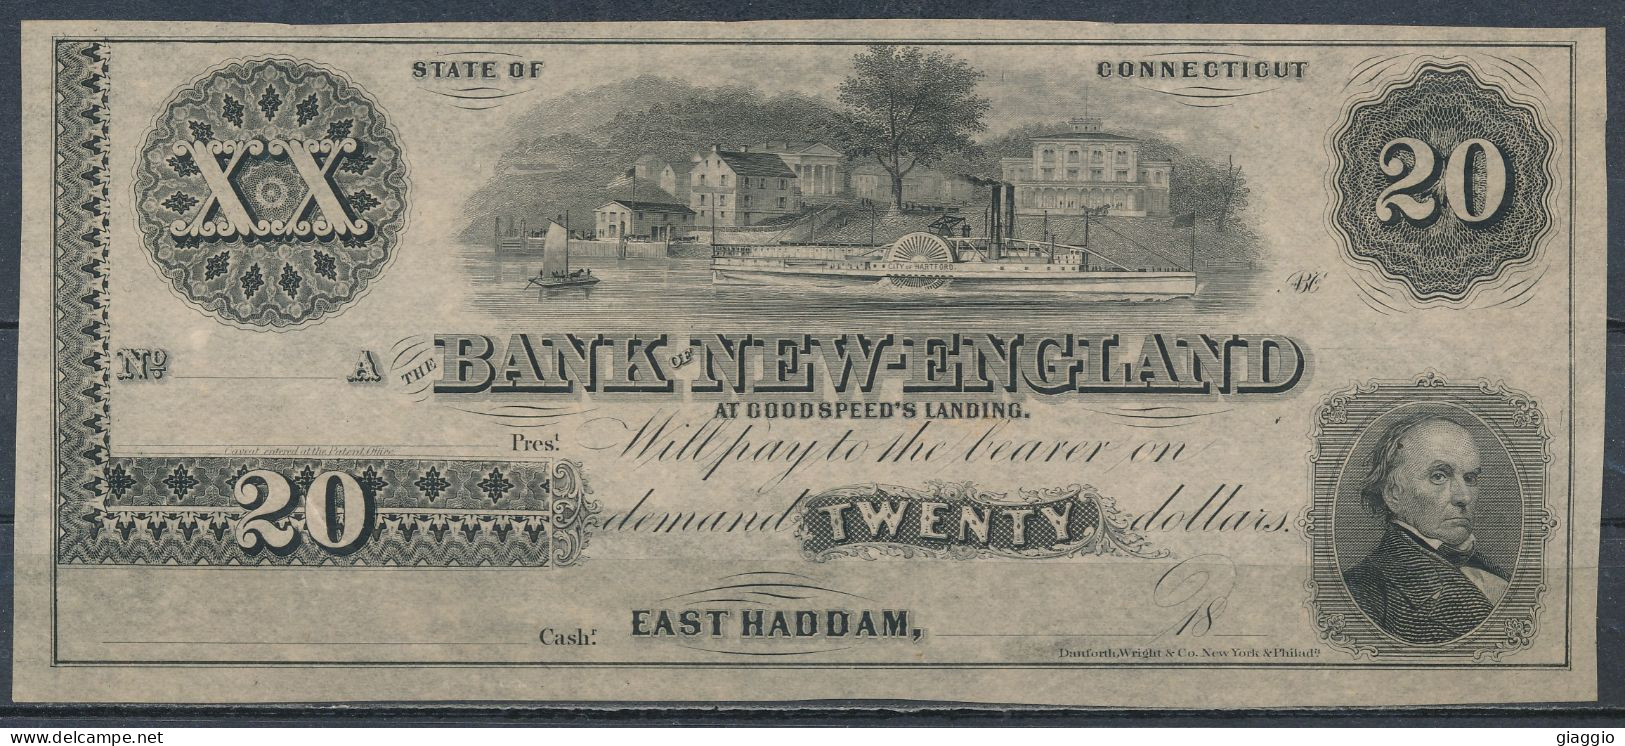 °°° USA - 20 DOLLARS 1860 BANK NEW ENGLAND °°° - Confederate Currency (1861-1864)